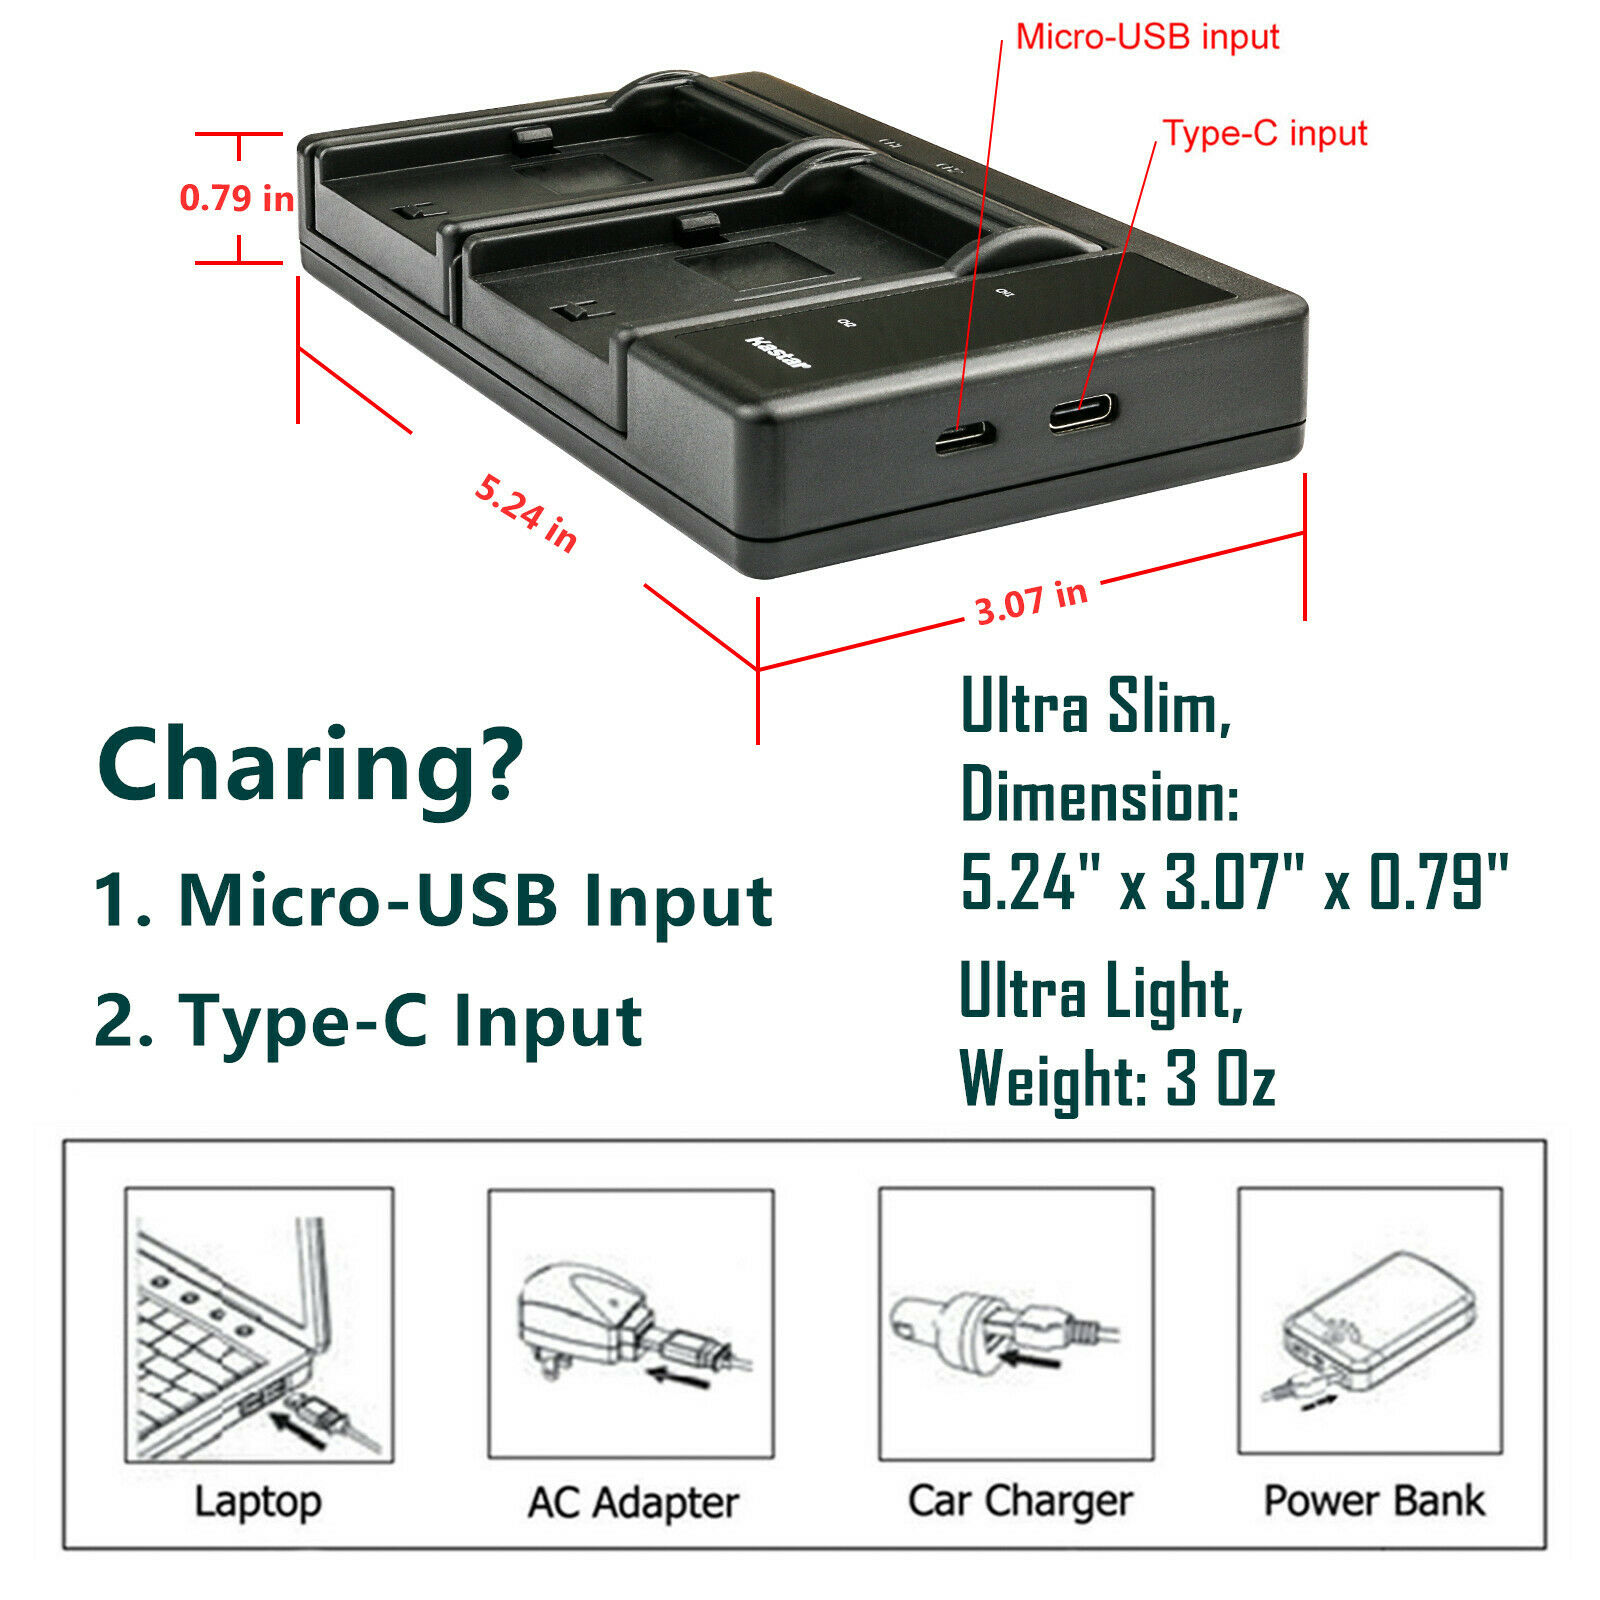 Kastar LTD2 USB Battery Charger Compatible with Hitachi DZ-GX3200, DZ-GX3300,  DZ-GX5300, DZ-GX5000A, DZ-GX5020, DZ-HS300, DZ-HS300A, DZ-HS300E, DZ-HS301E,  DZ-HS301SW, DZ-HS303, DZ-HS303A - Walmart.com